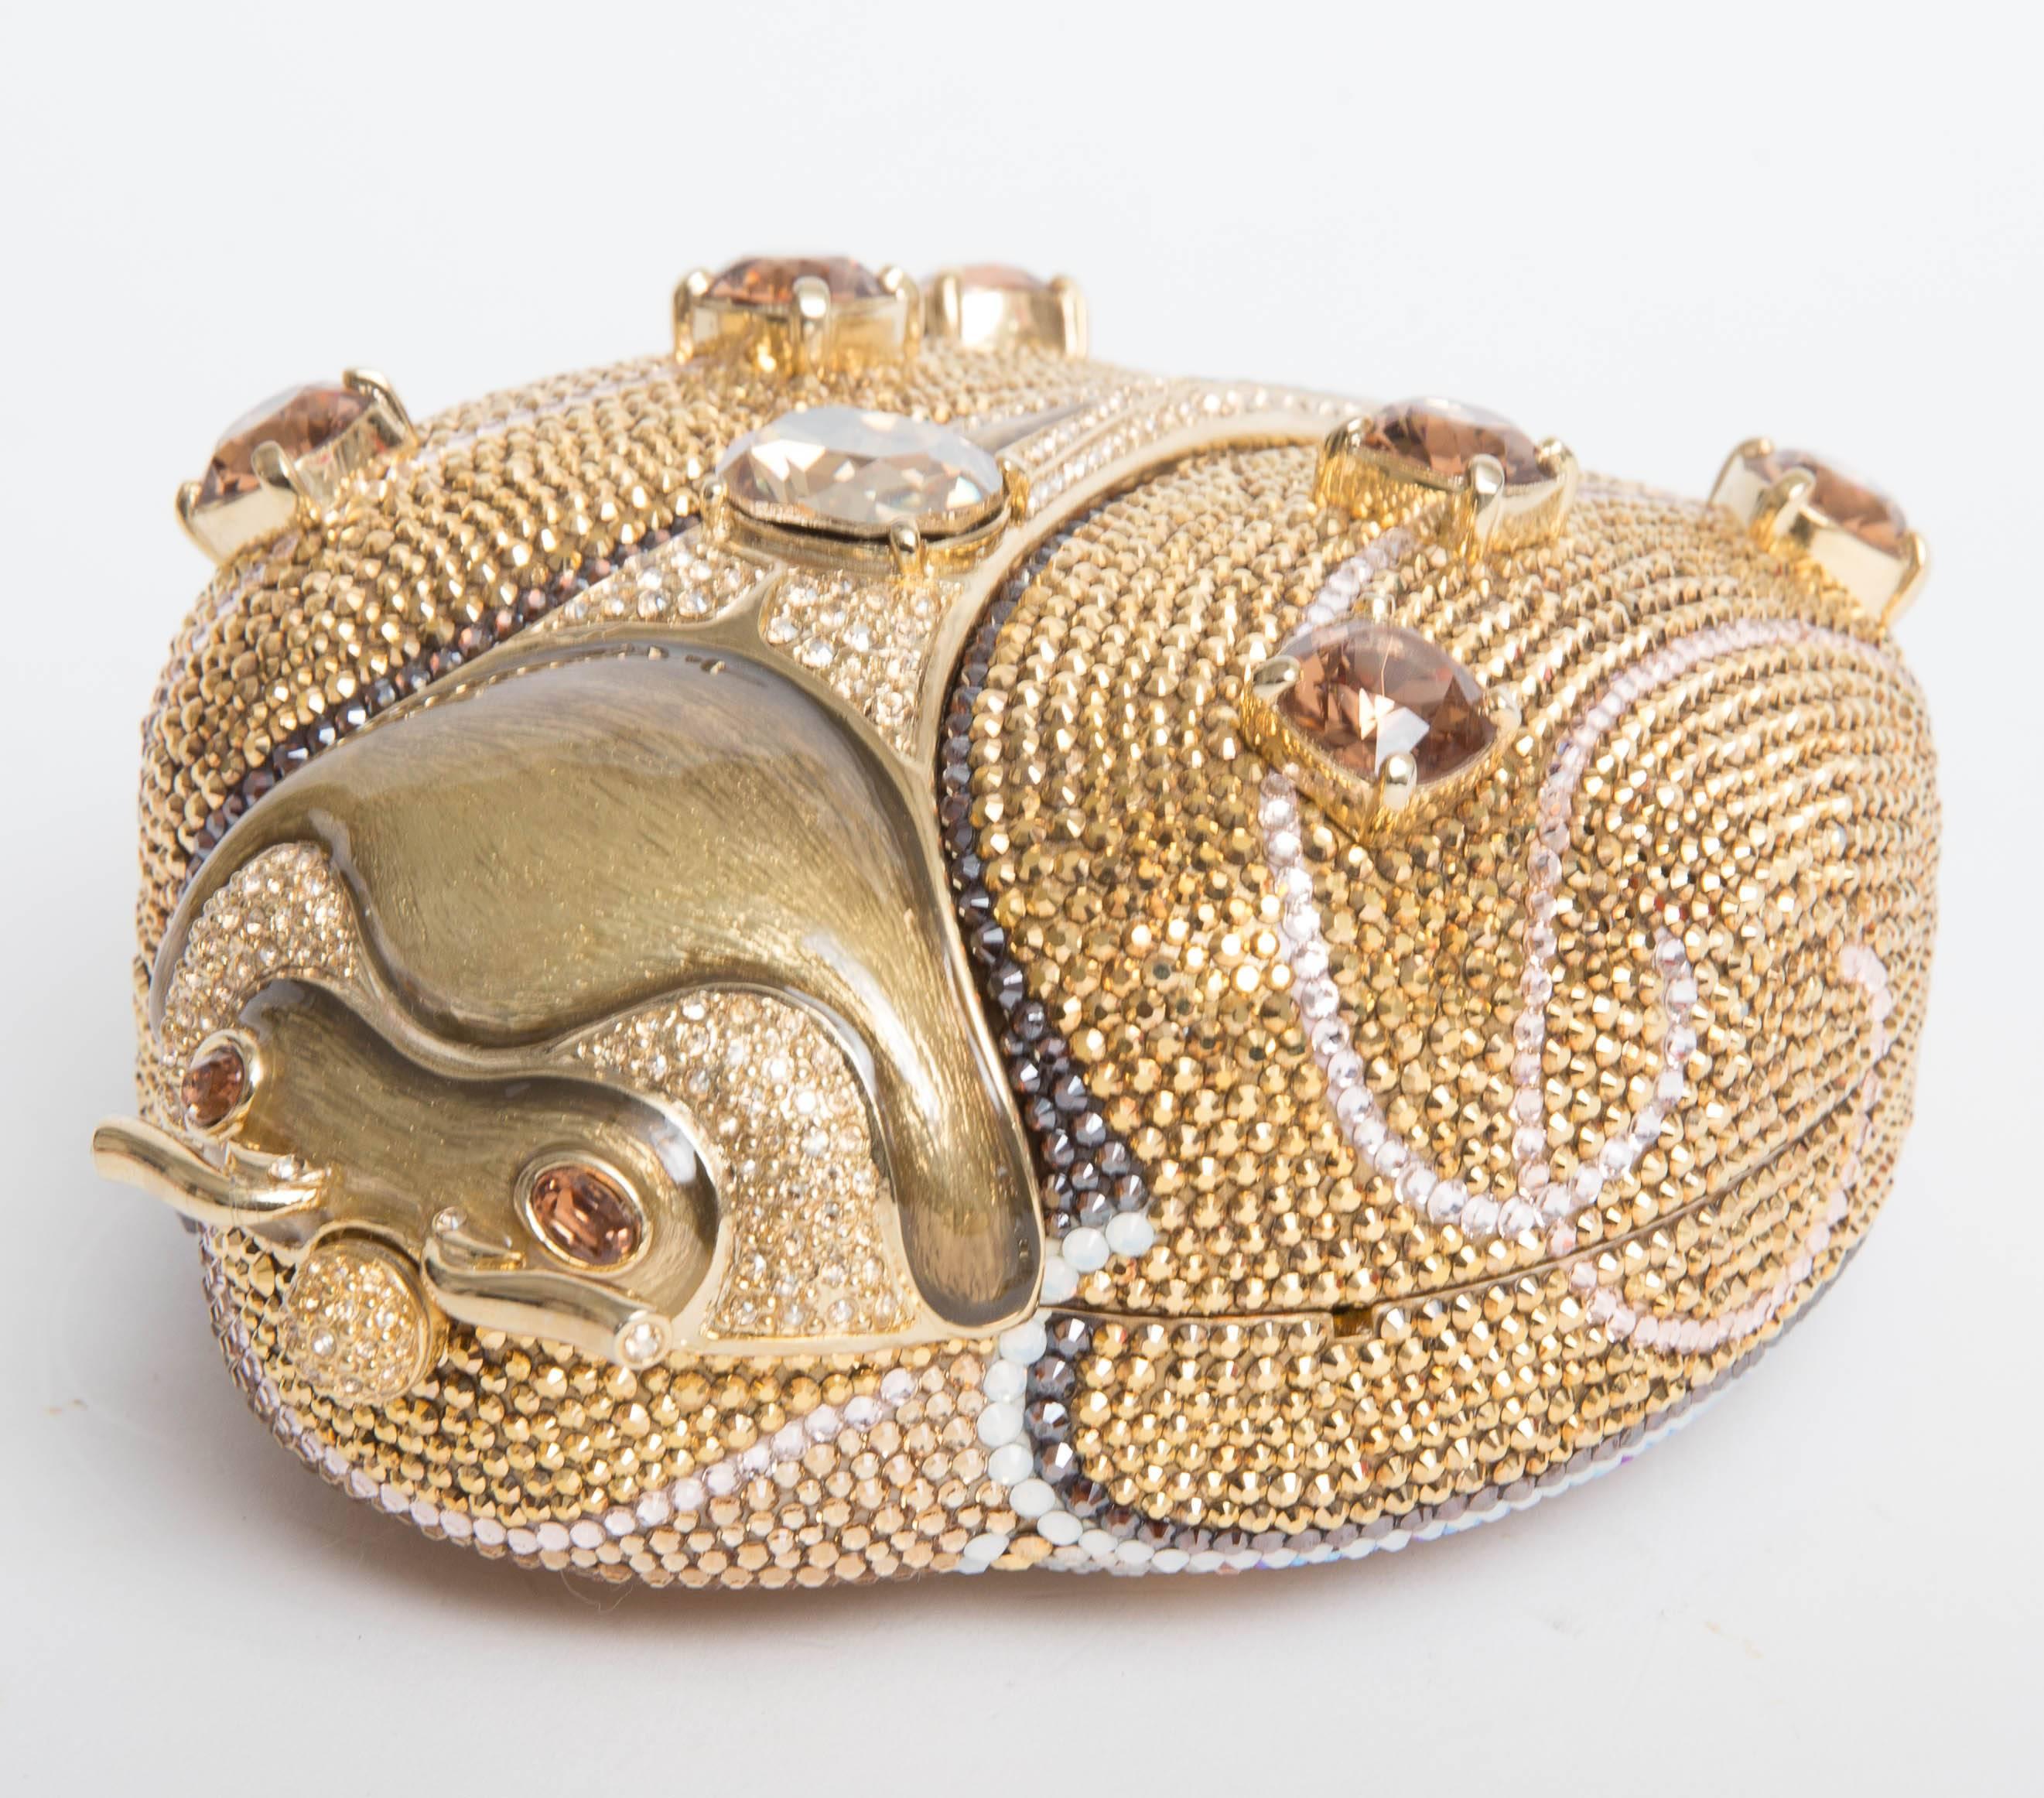 Judith Leiber Gold Tone Beaded Crystal Ladybug Minaudiere.
Limited Edition ladybug minaudiere handbag framed in antique gold and completely covered in aurum( gold dipped) Austrian crystals with large prong set topaz crystals featuring protective